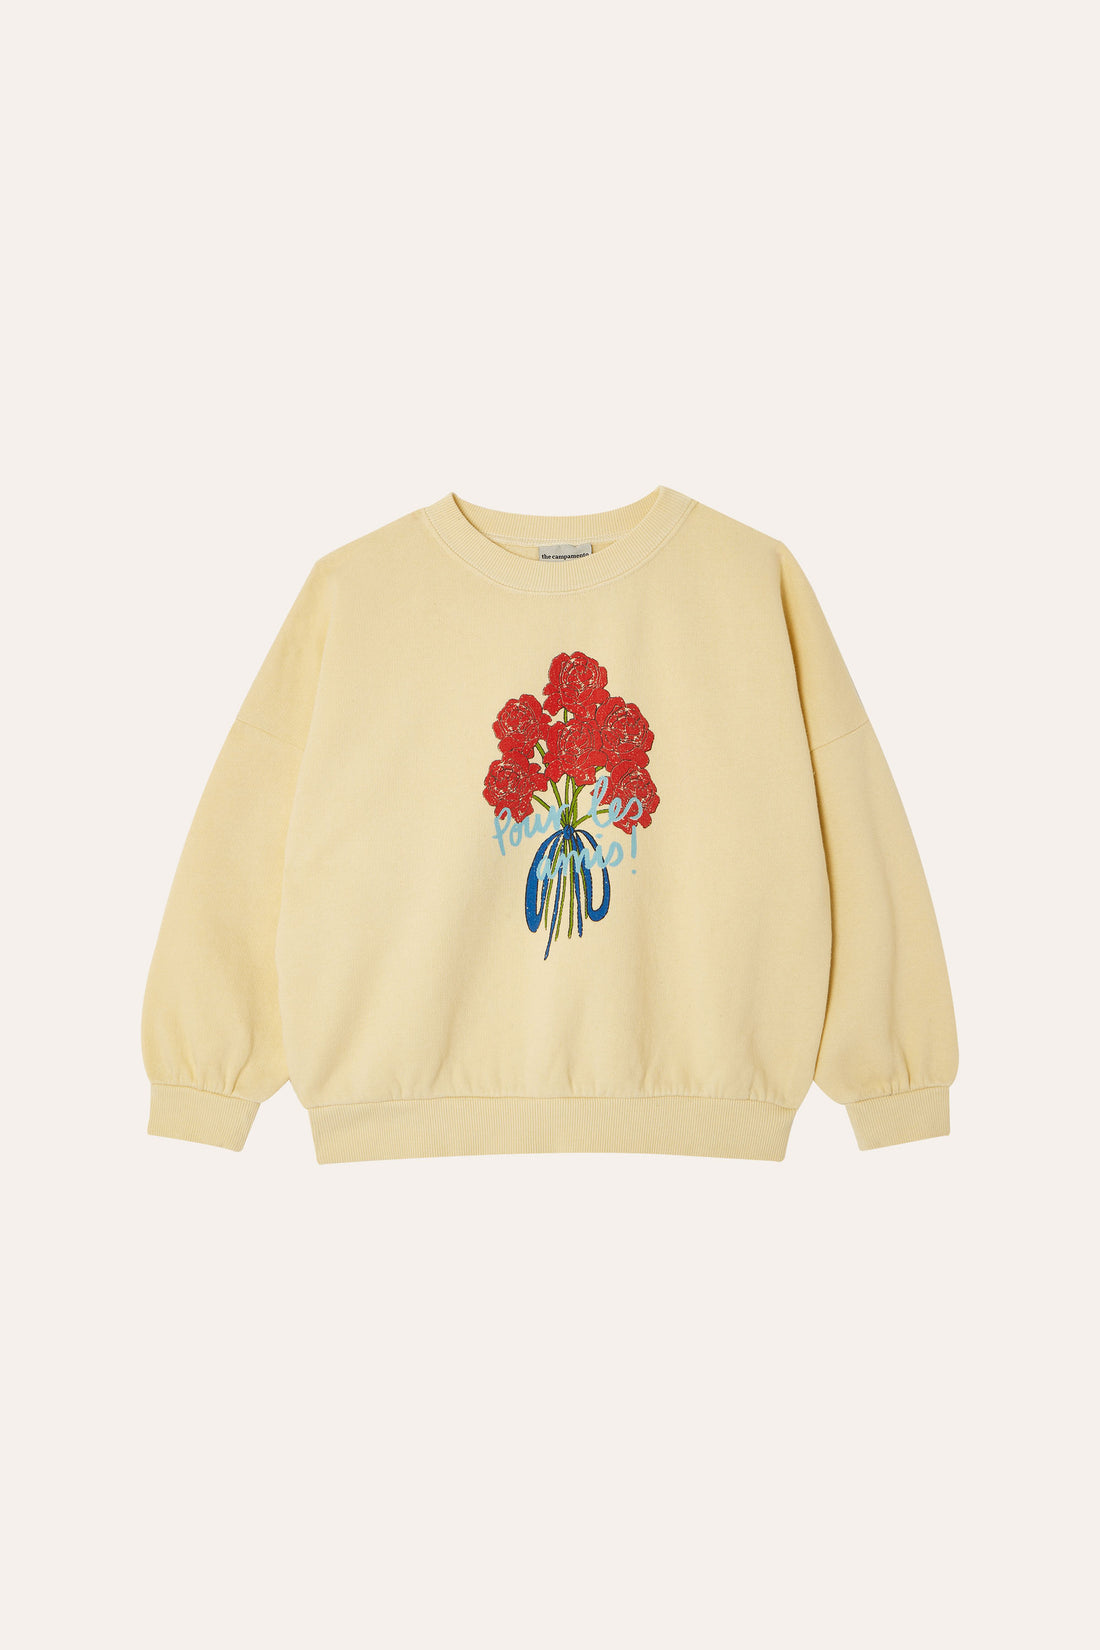 The Campamento - Flower bouquet oversized kids sweater - Yellow